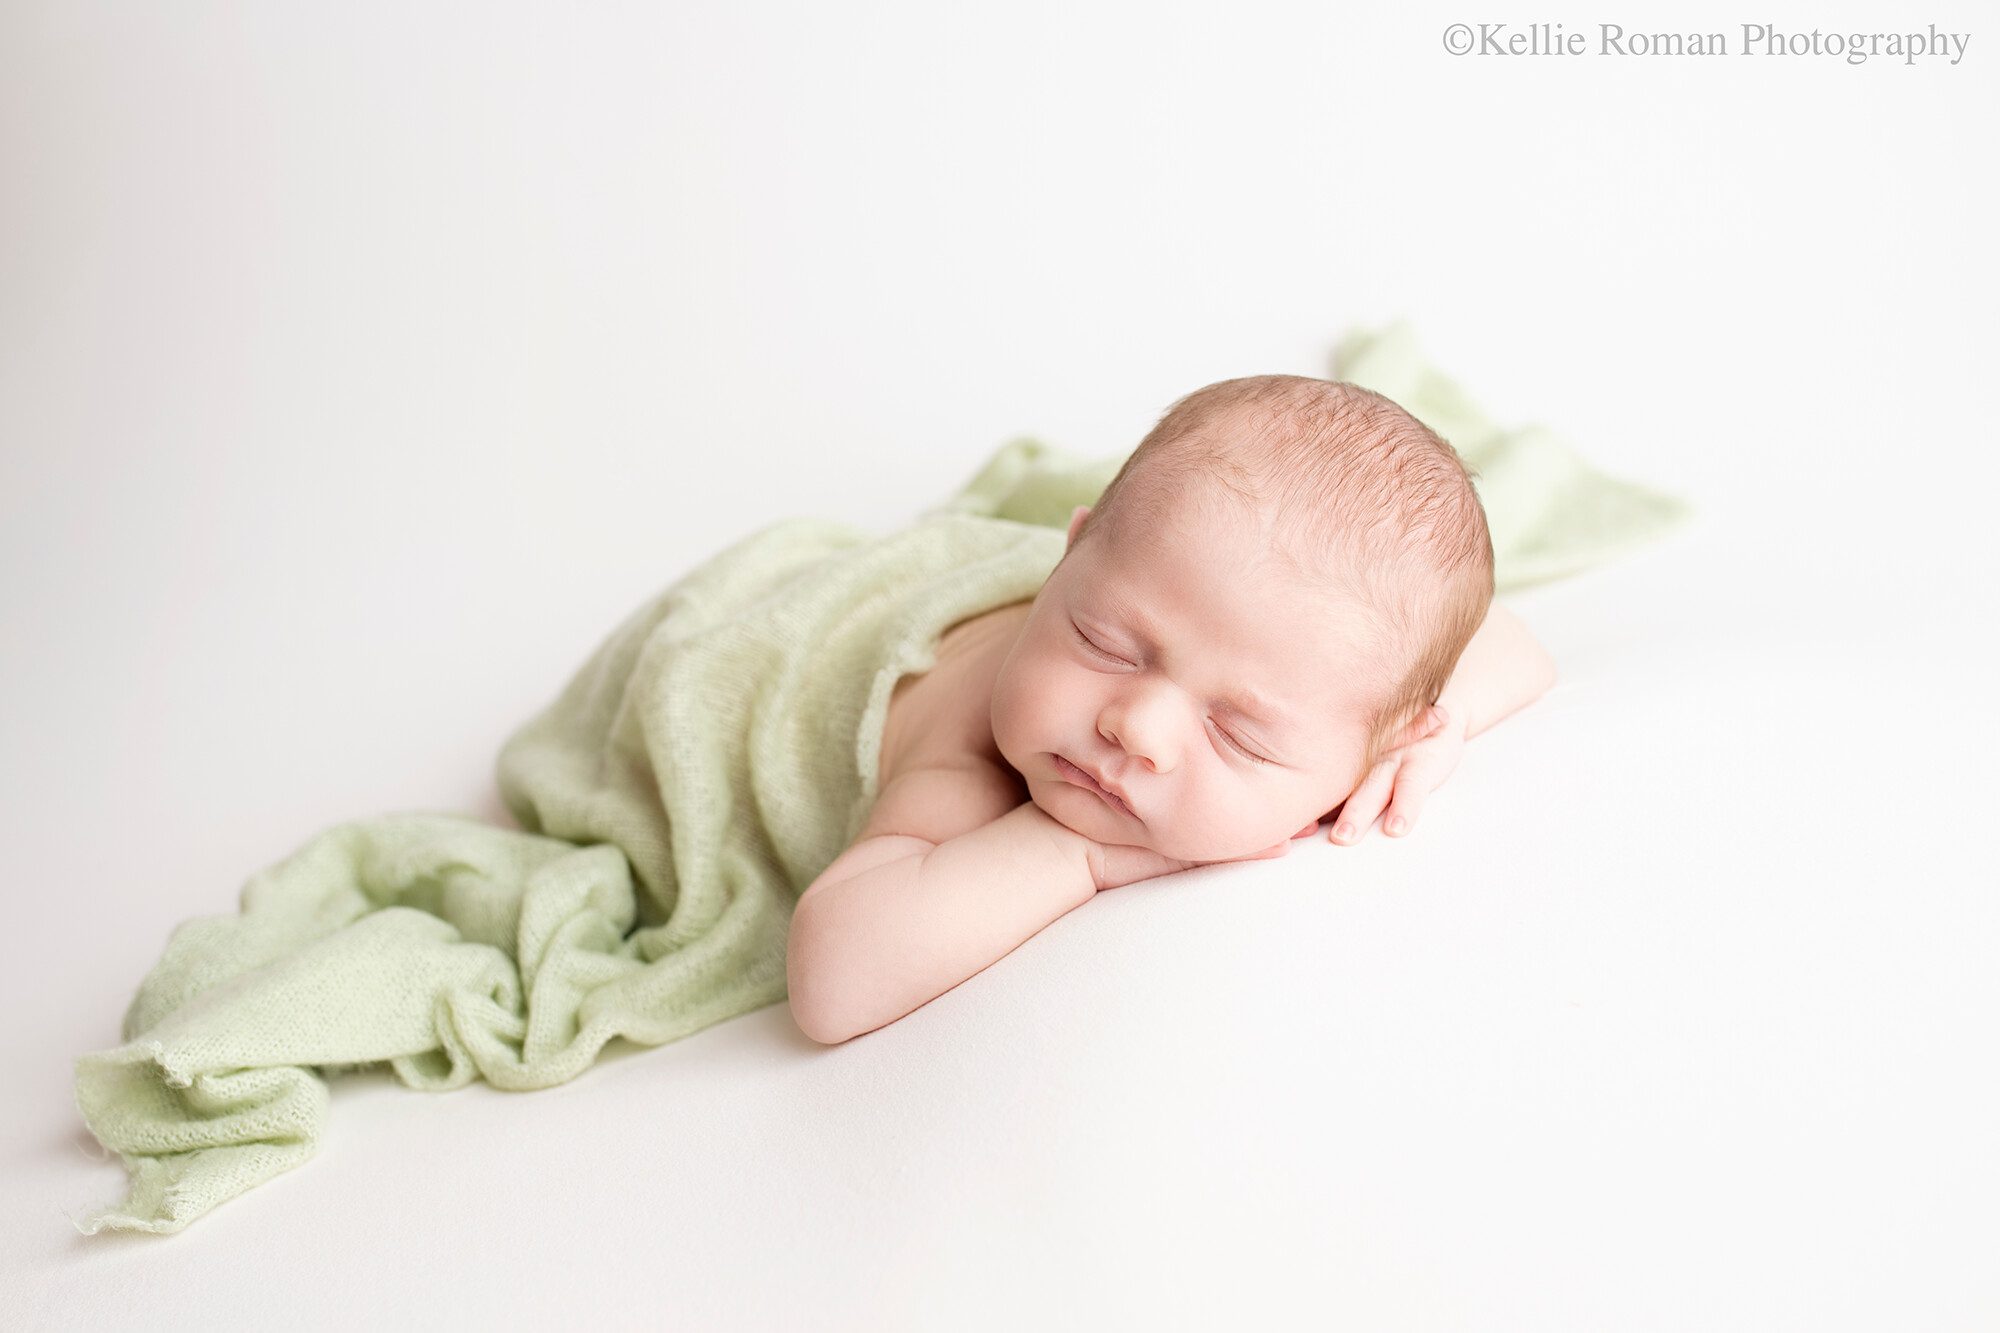 milwaukee newborn pics. a baby boy is in greendale photography studio. he is sleeping on his belly with his chin resting on his hands. he's laying on top of a cream fabric, with a light green knit swaddle covering his diaper, feet, and back.